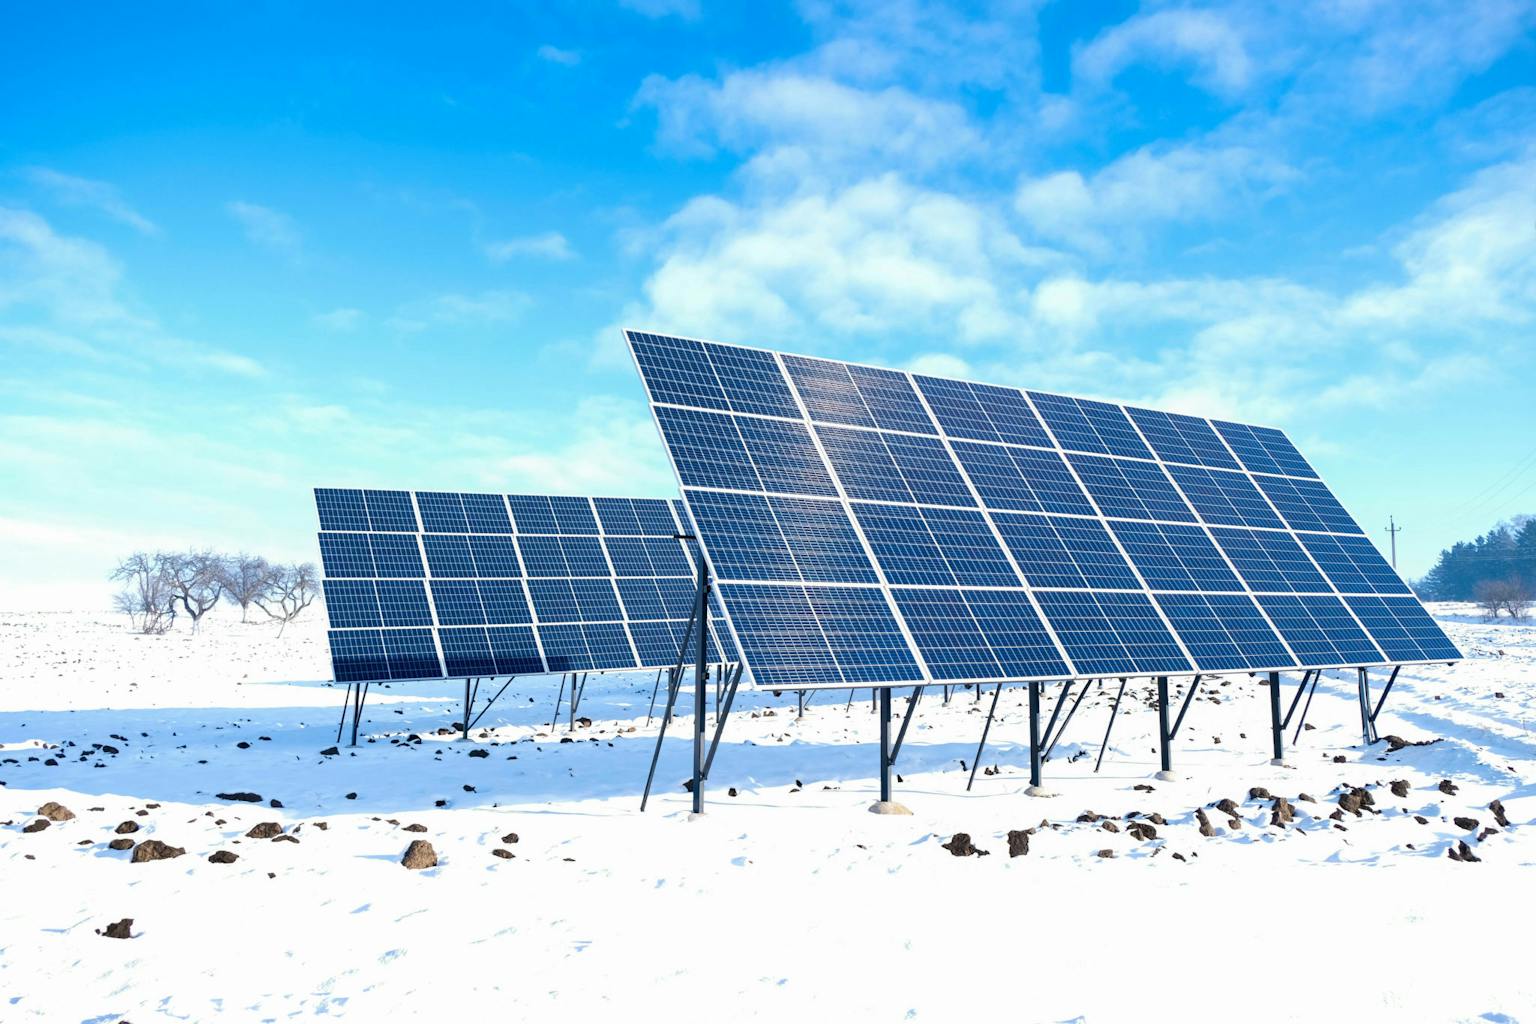 How effective are Solar Panels in the winter?